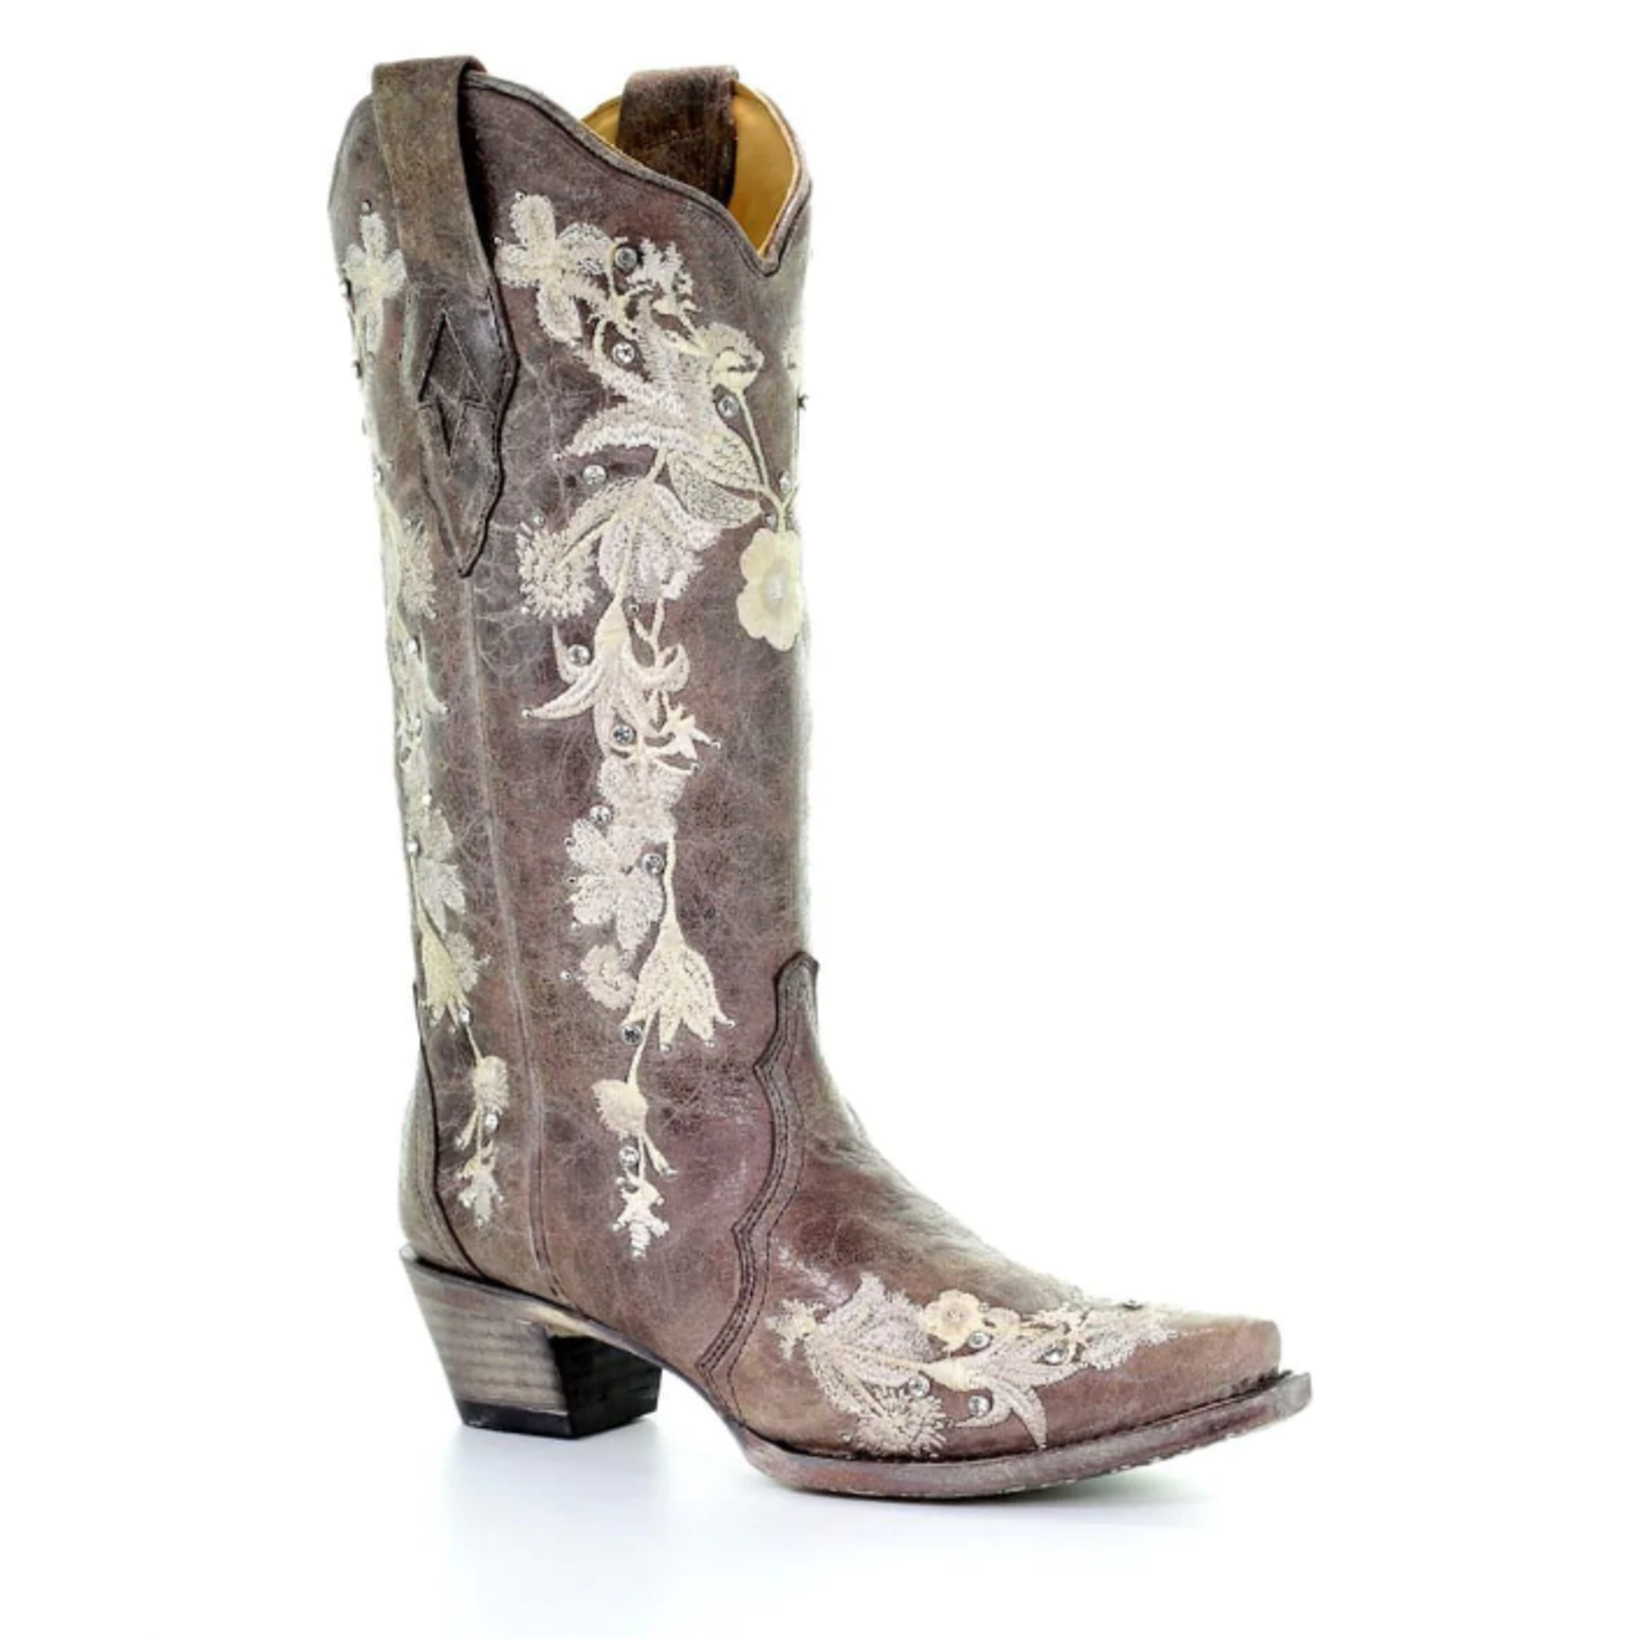 Corral Lds Tobacco Embr Crystal Bridal Boot